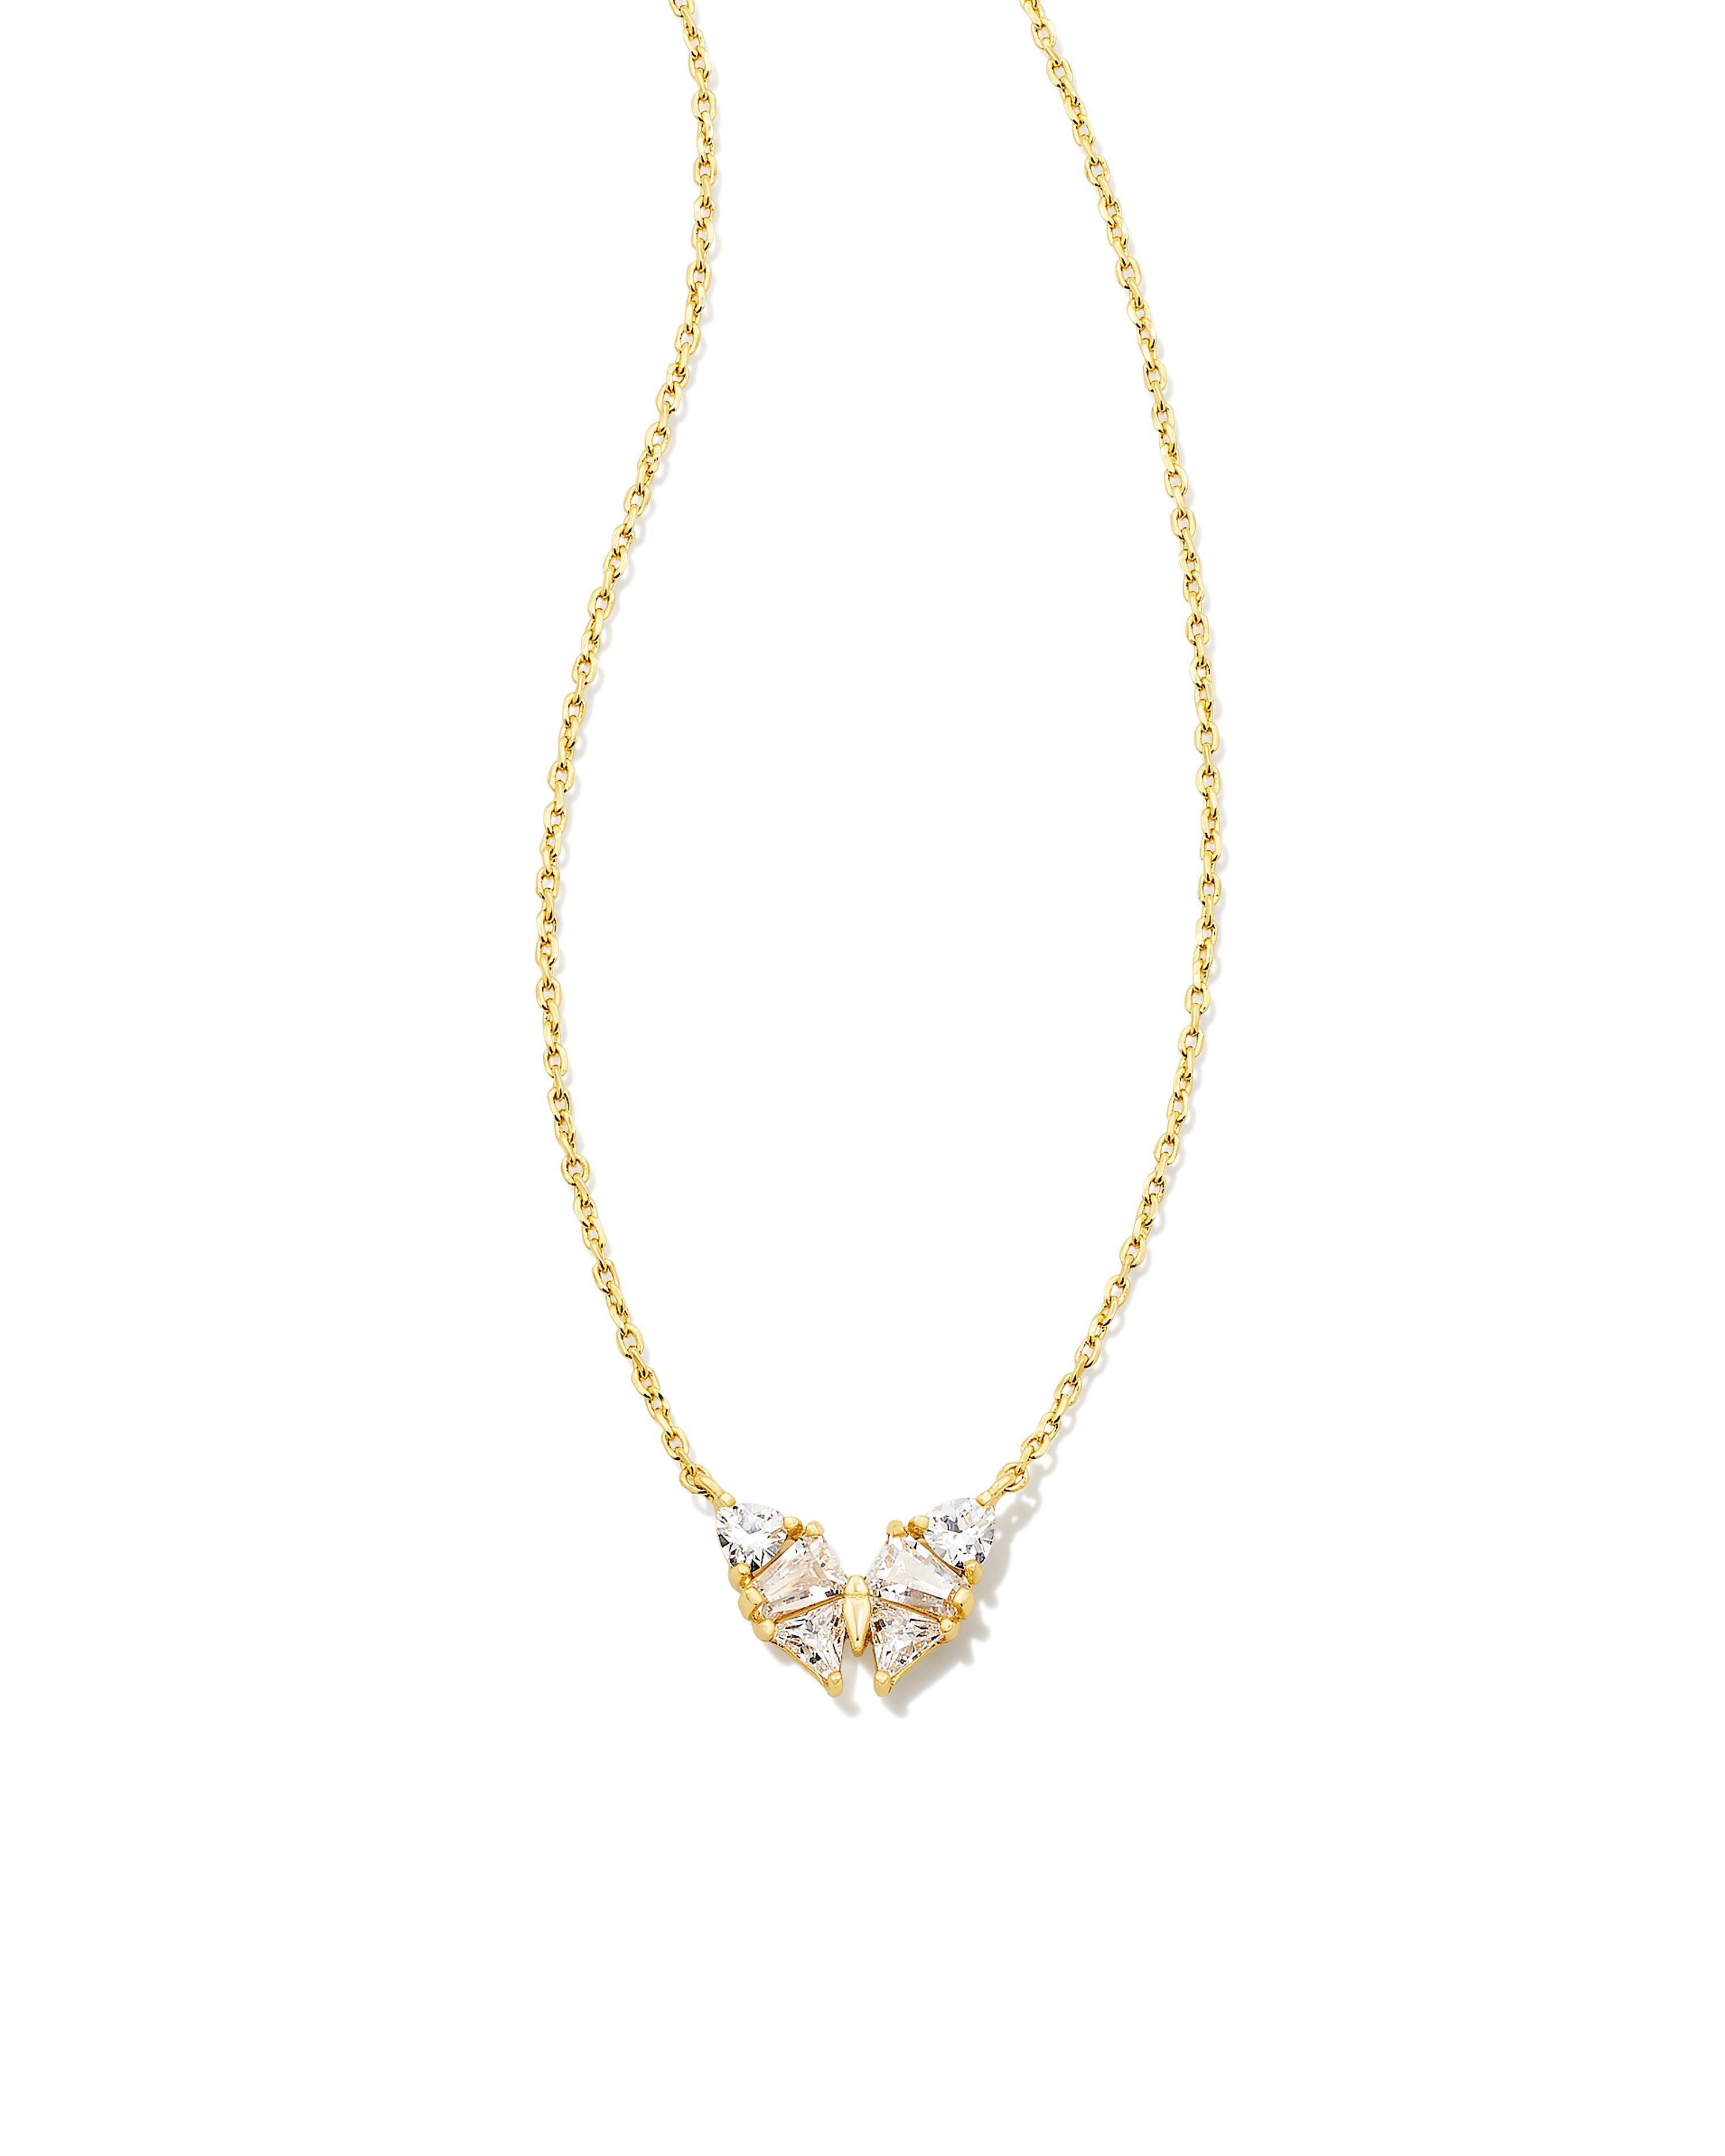 Blair Butterfly Small Pendant Necklace in Gold White Crystal